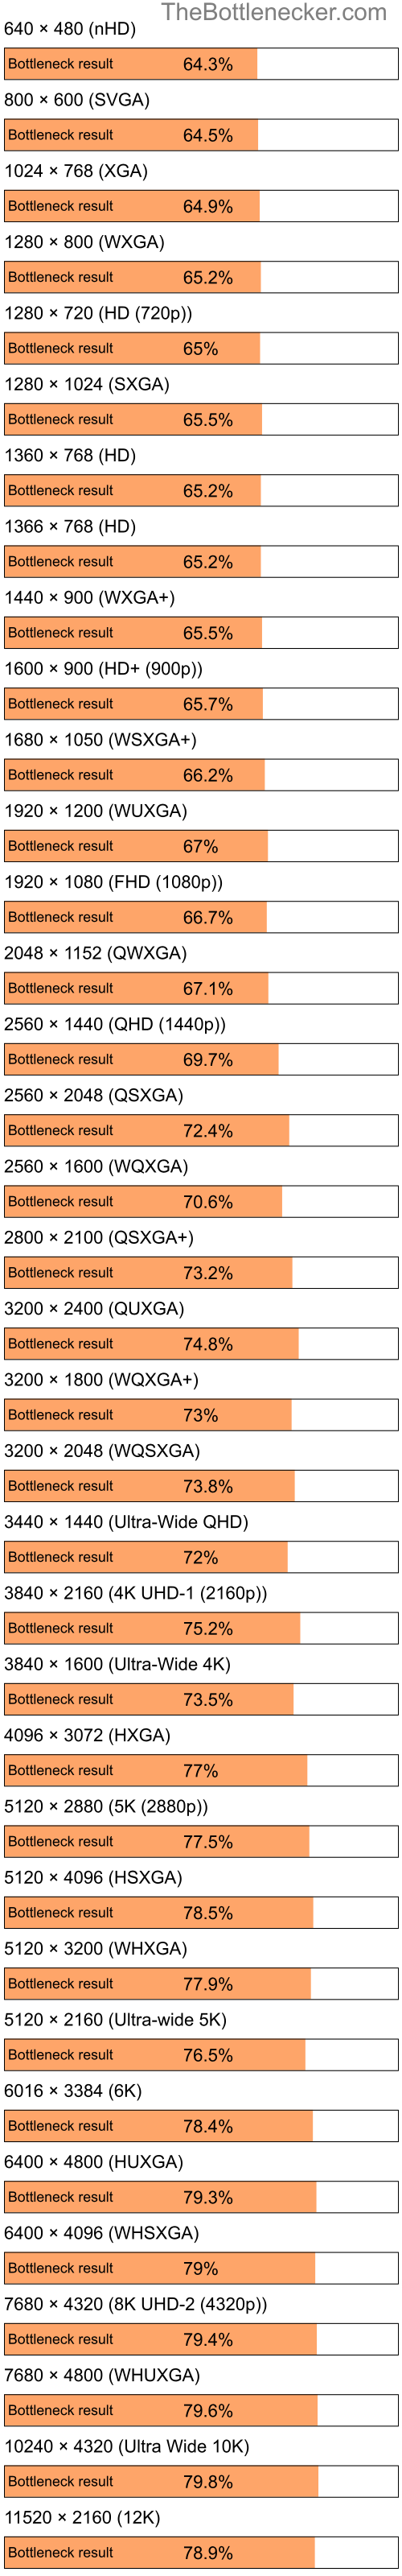 Bottleneck results by resolution for Intel Pentium 4 and NVIDIA Quadro FX 3000 in General Tasks